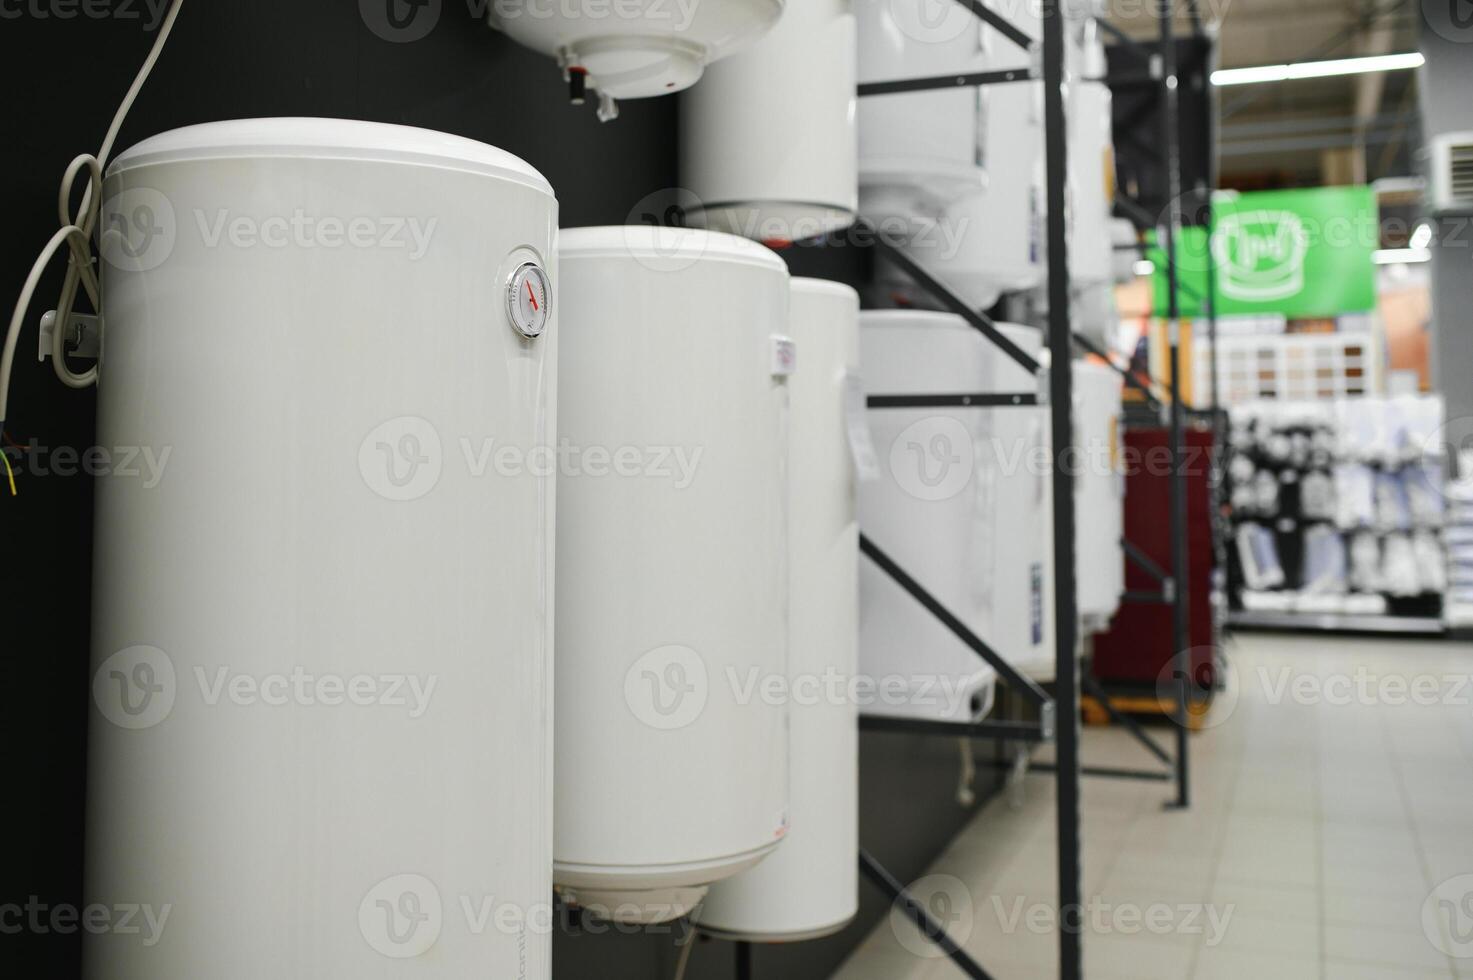 Variety of modern electric boilers presented in store photo